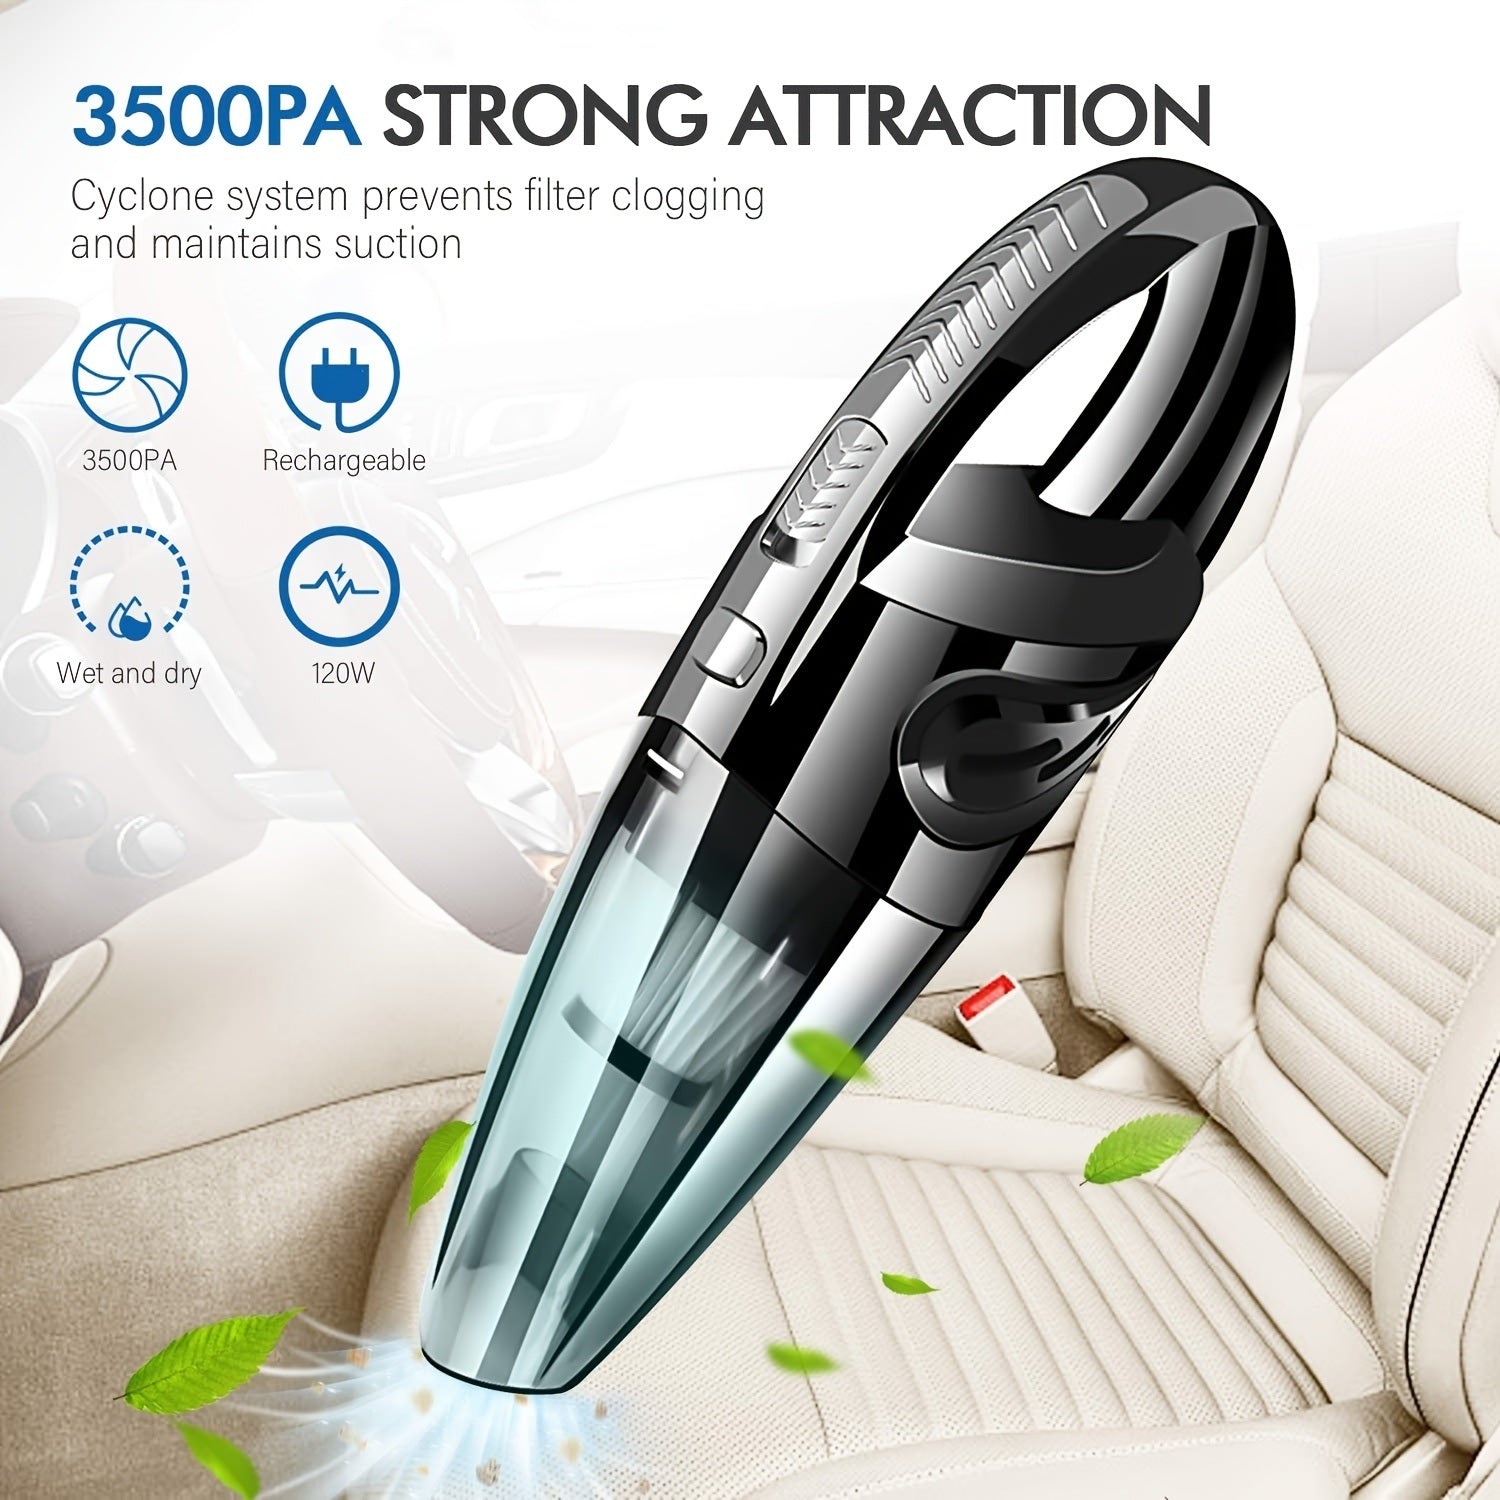 Handheld Vacuum Cleaner; Cordless Rechargeable Lightweight Portable Mini Hand Vac With Powerful Cyclonic Suction For Wet Dry Car Pet Hair Home Use